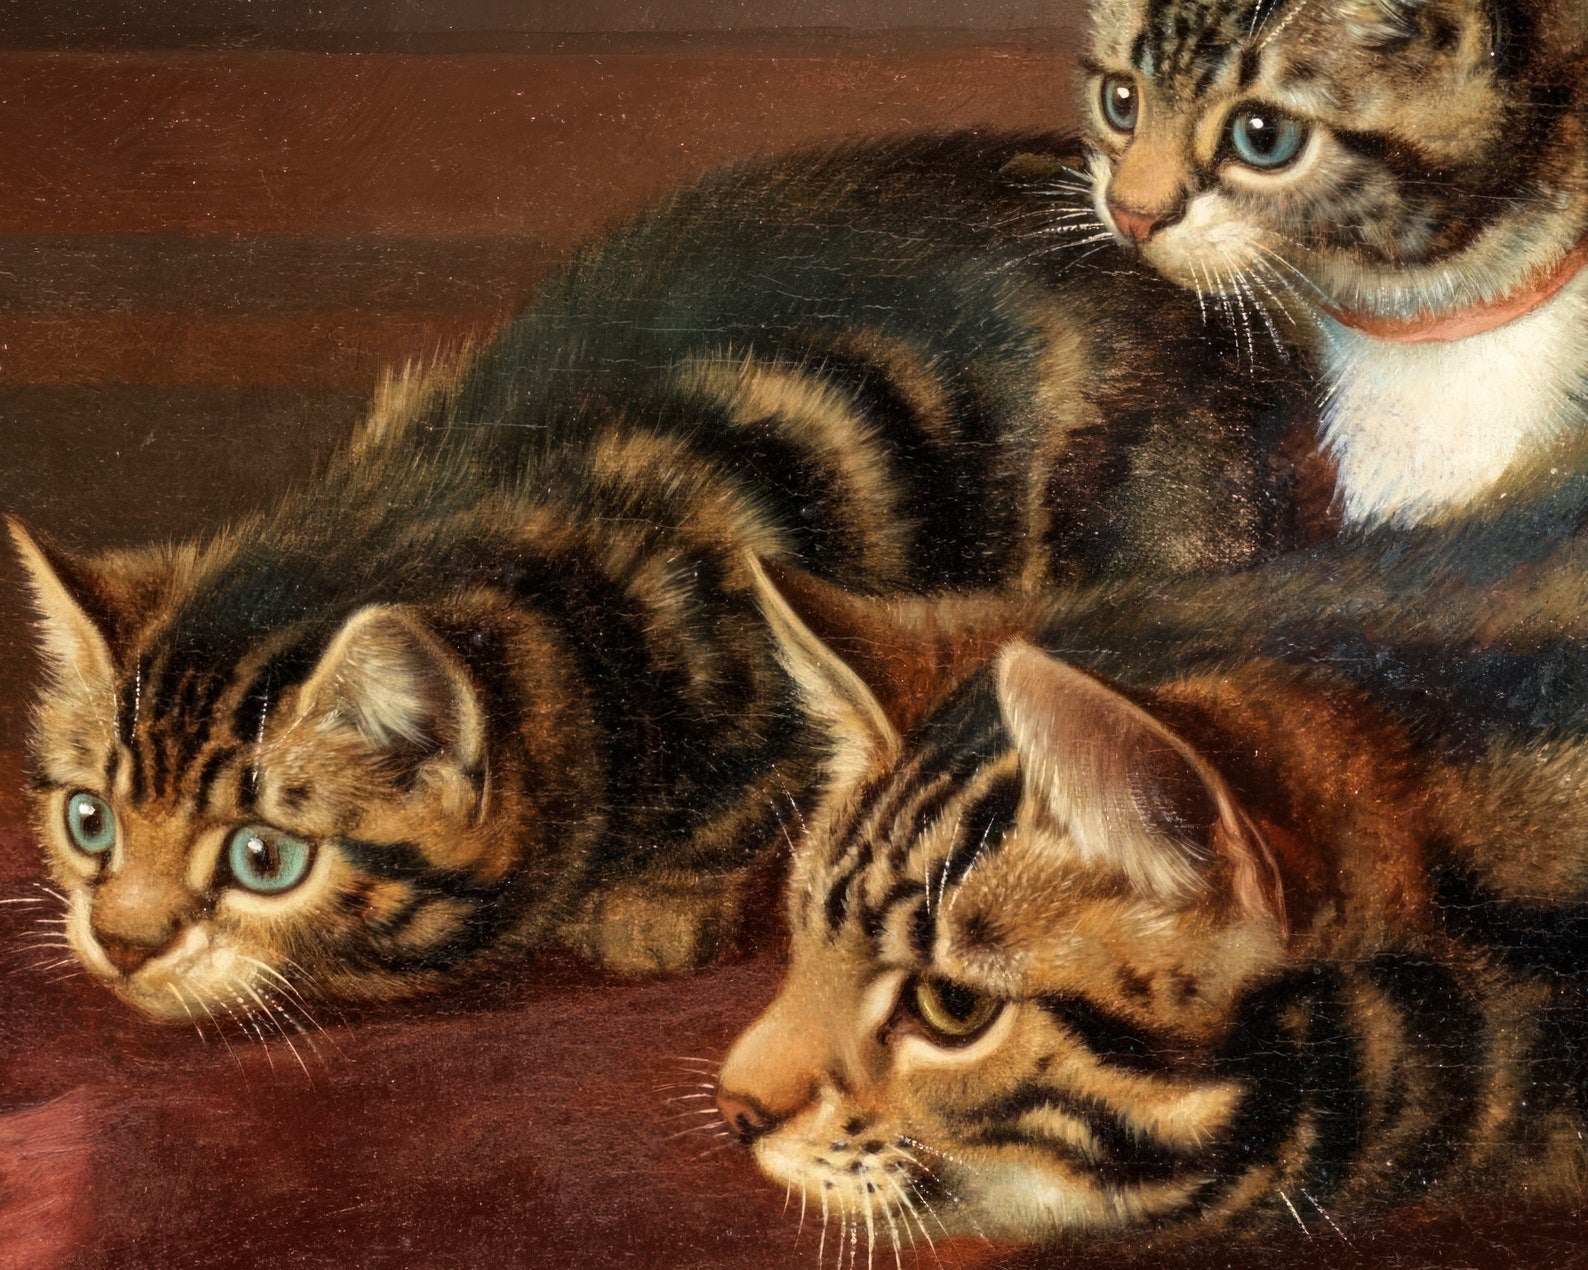 Horatio Henry Couldery "Cats by a Fishbowl" (c.1860) - Mabon Gallery